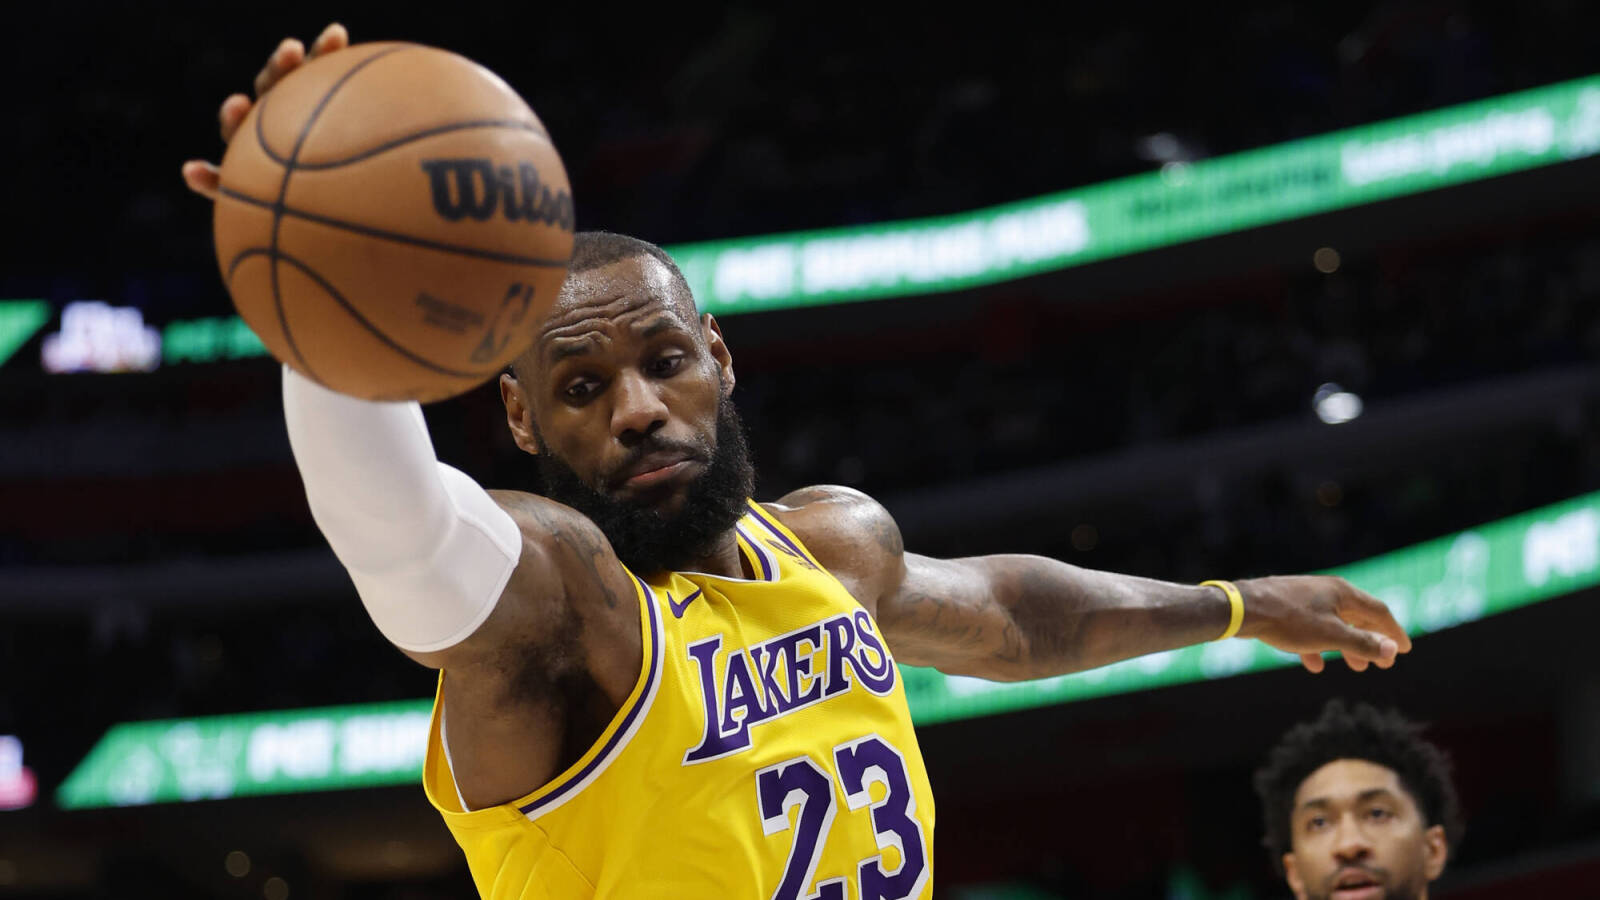 LeBron James will skip Lakers game to watch son's debut